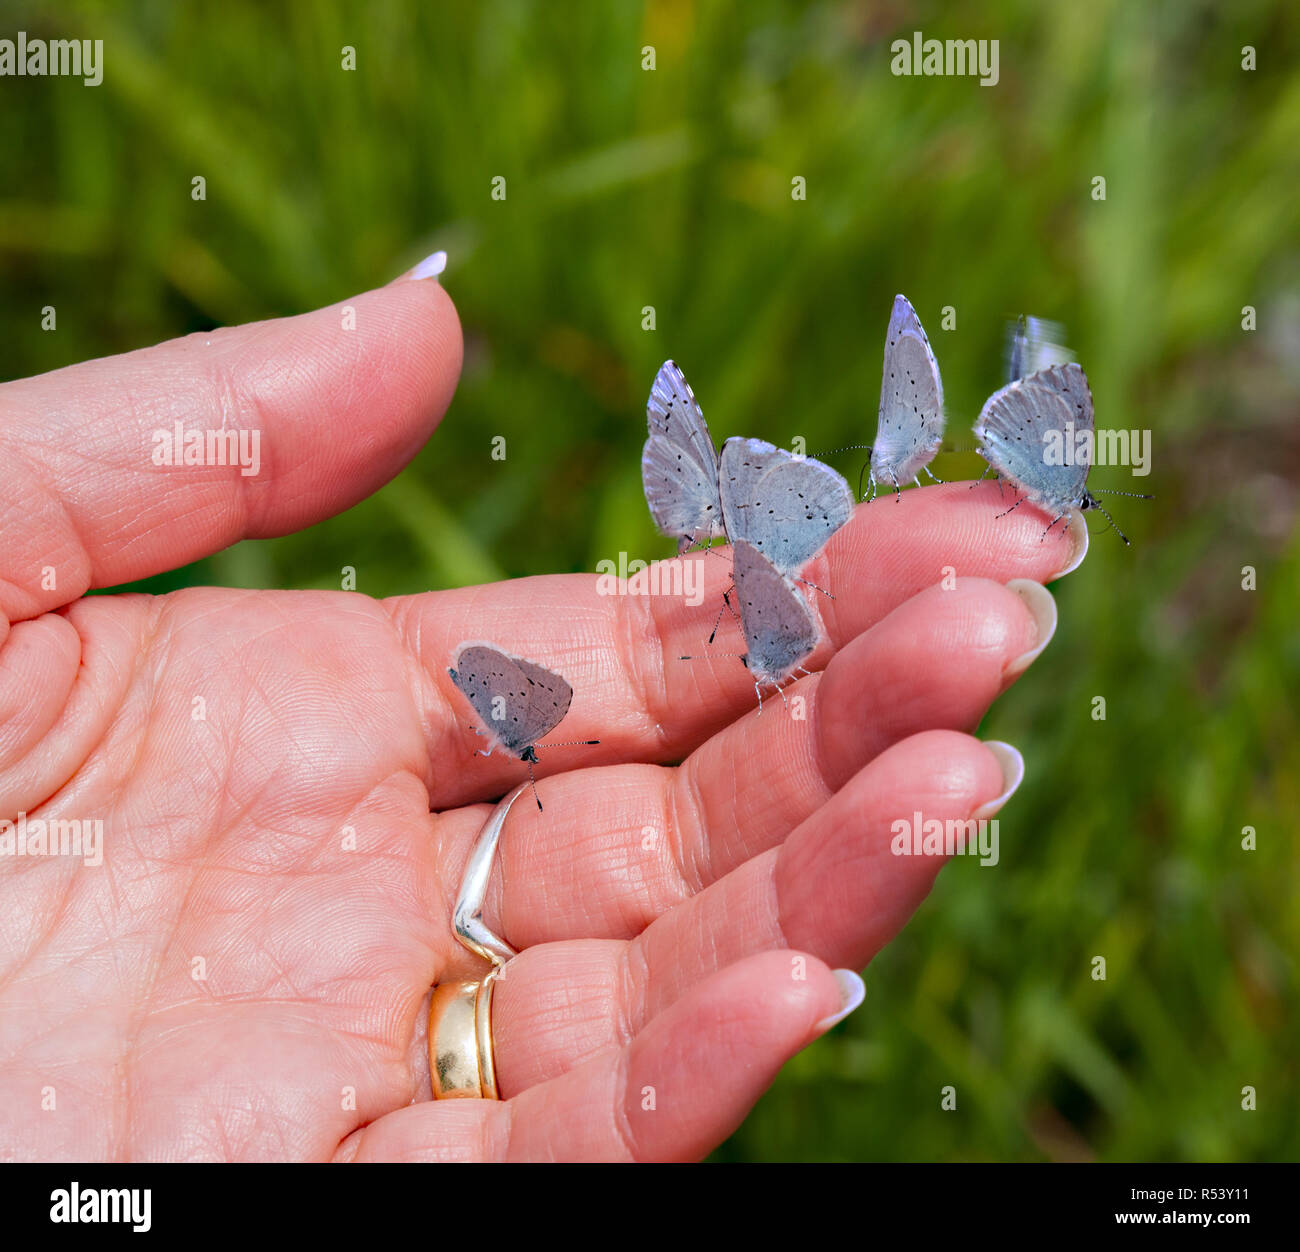 Woman person with many lots of Blue butterflies on their her hand taking salts and nutrients from the sweaty skin Stock Photo